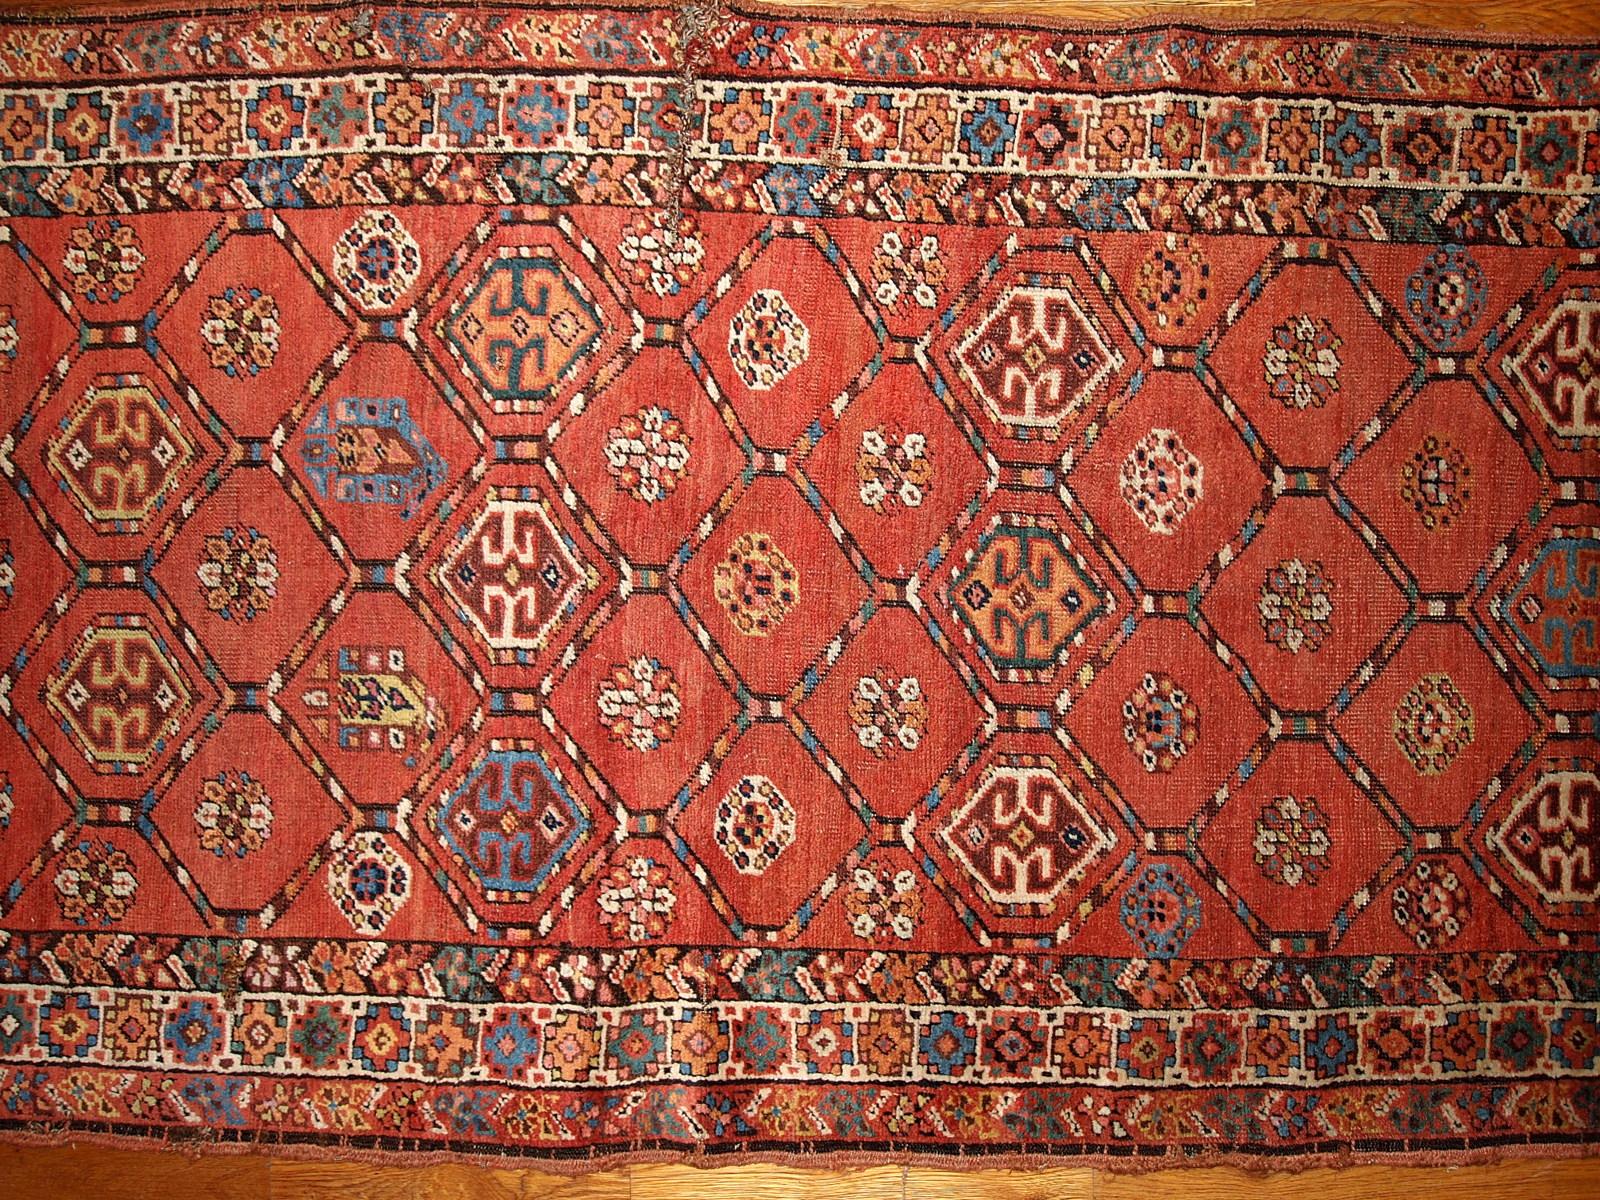 Antique handmade Kurdish runner in bright red color. The rug has one cut on the side and damaged corner with several small holes. Measures: 3.2' x 12.2' (97cm x 371cm).